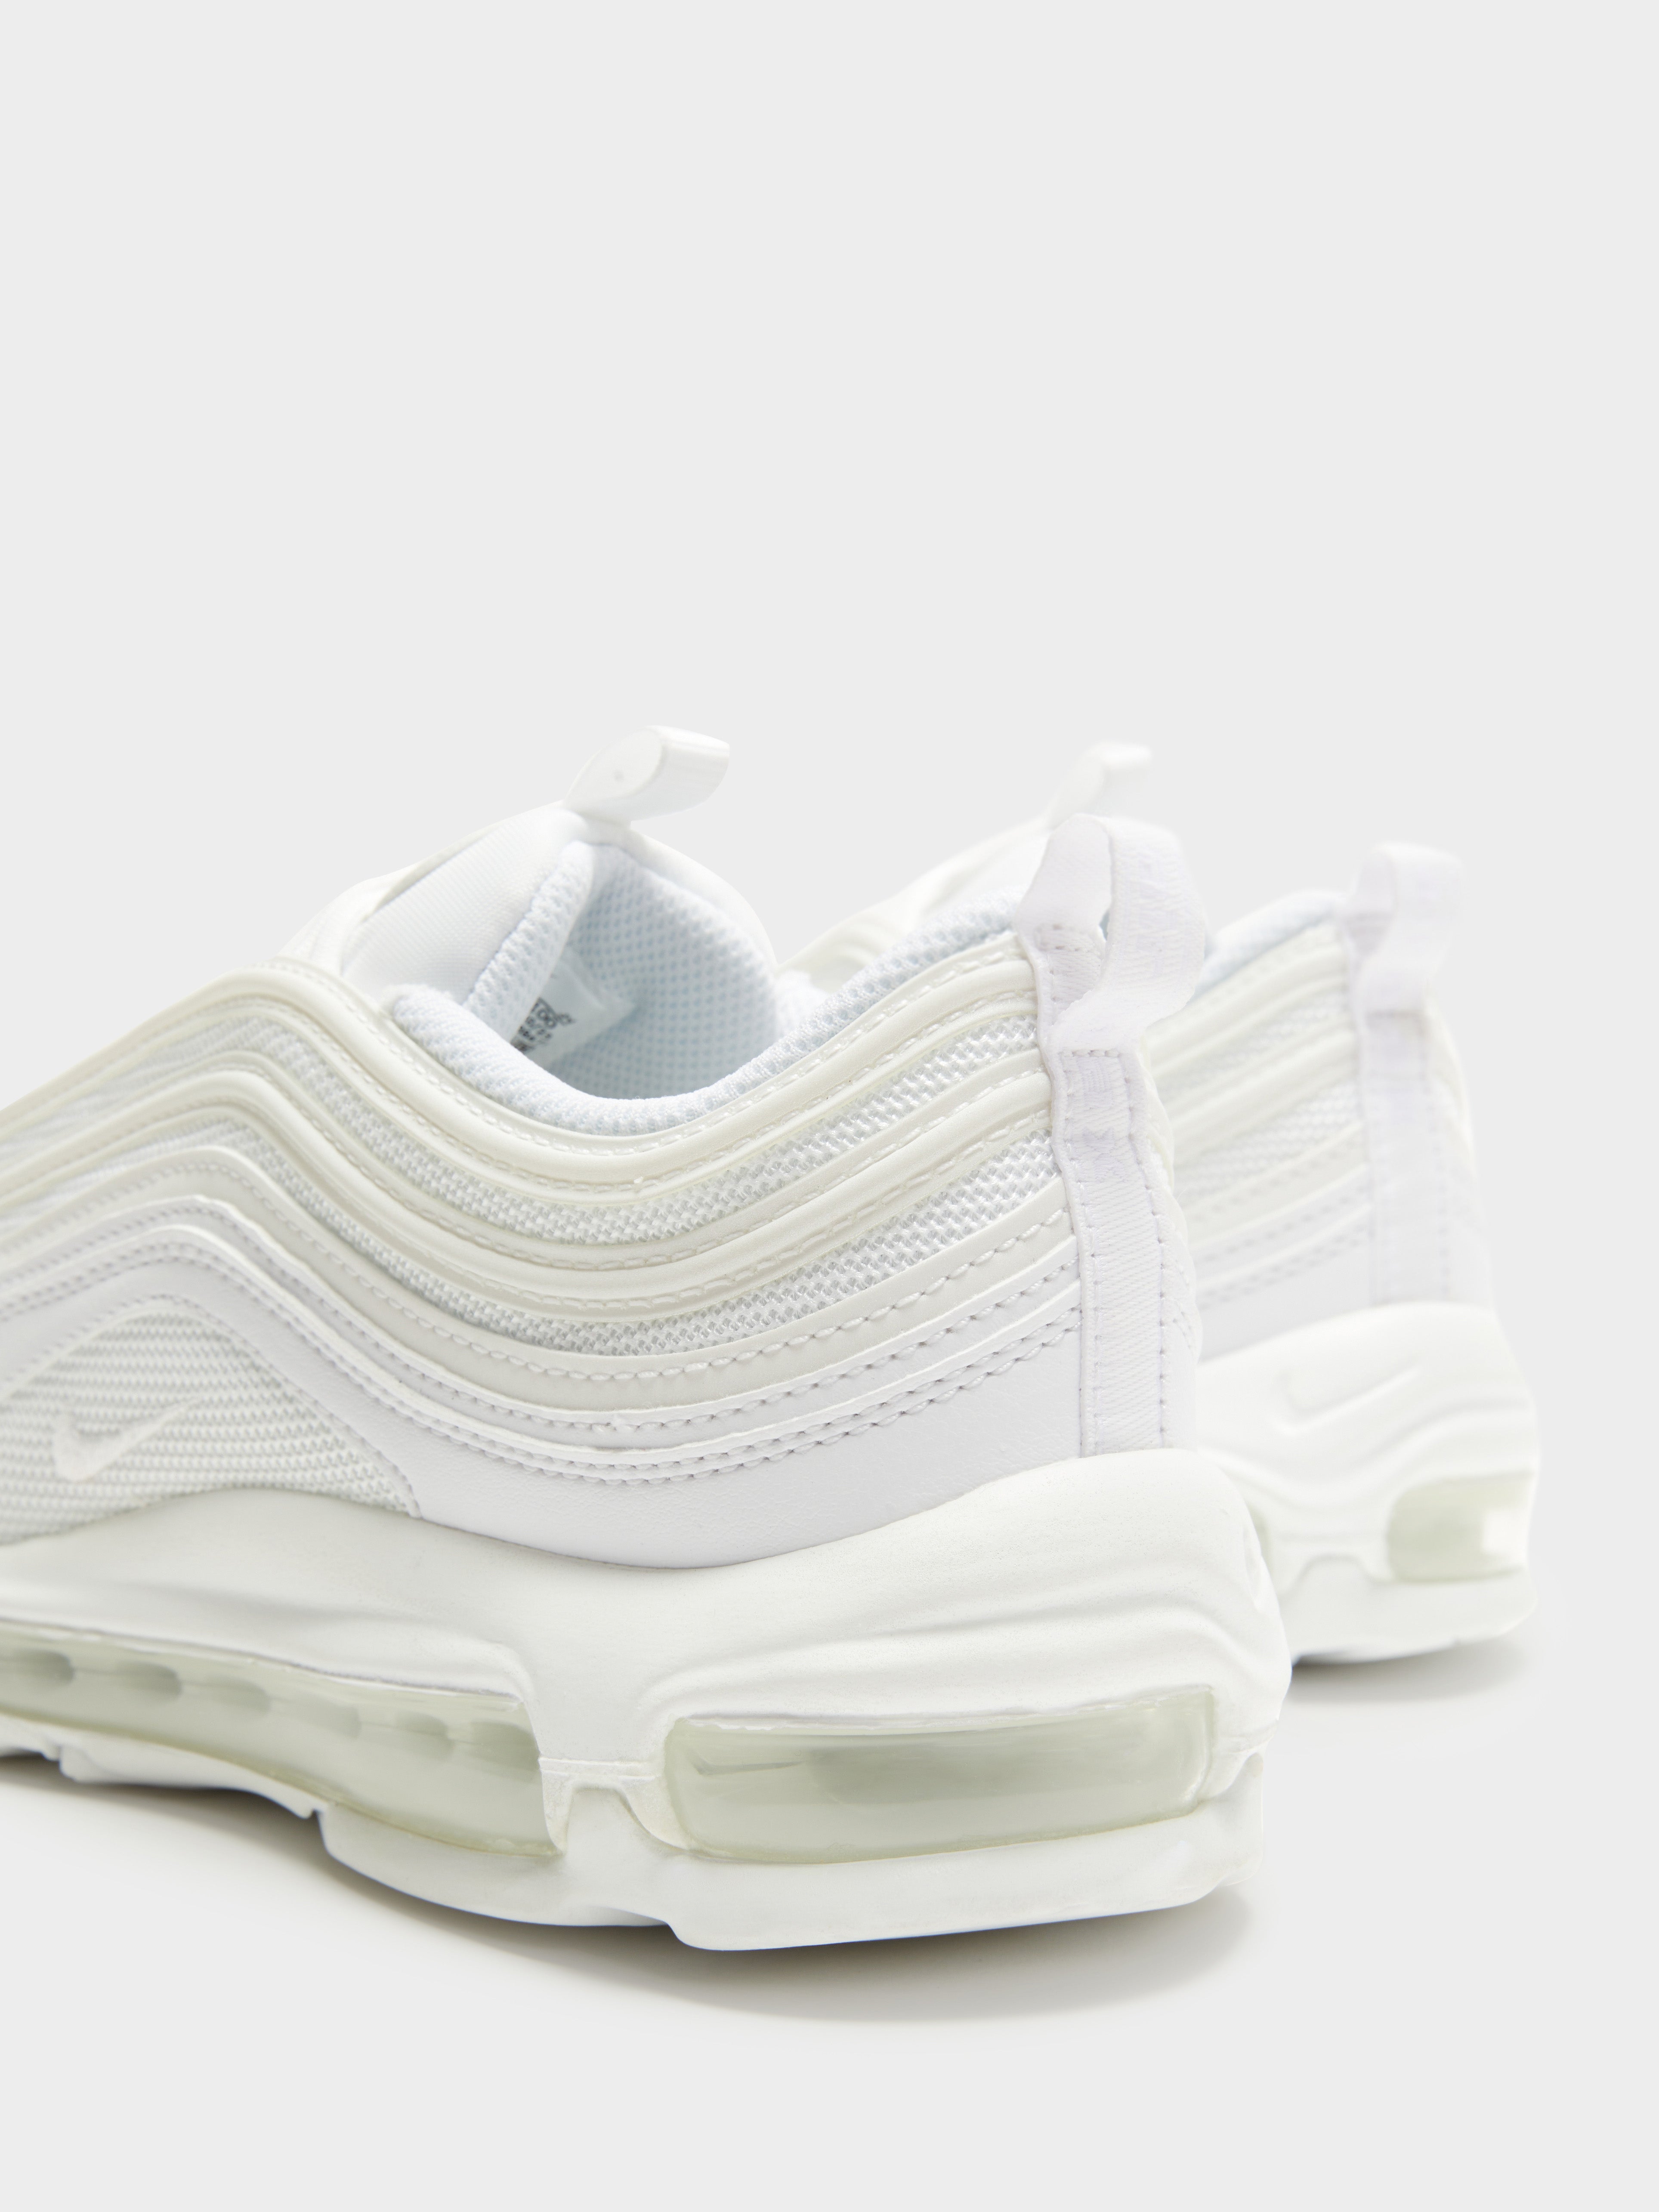 Womens Air Max 97 Sneakers in White